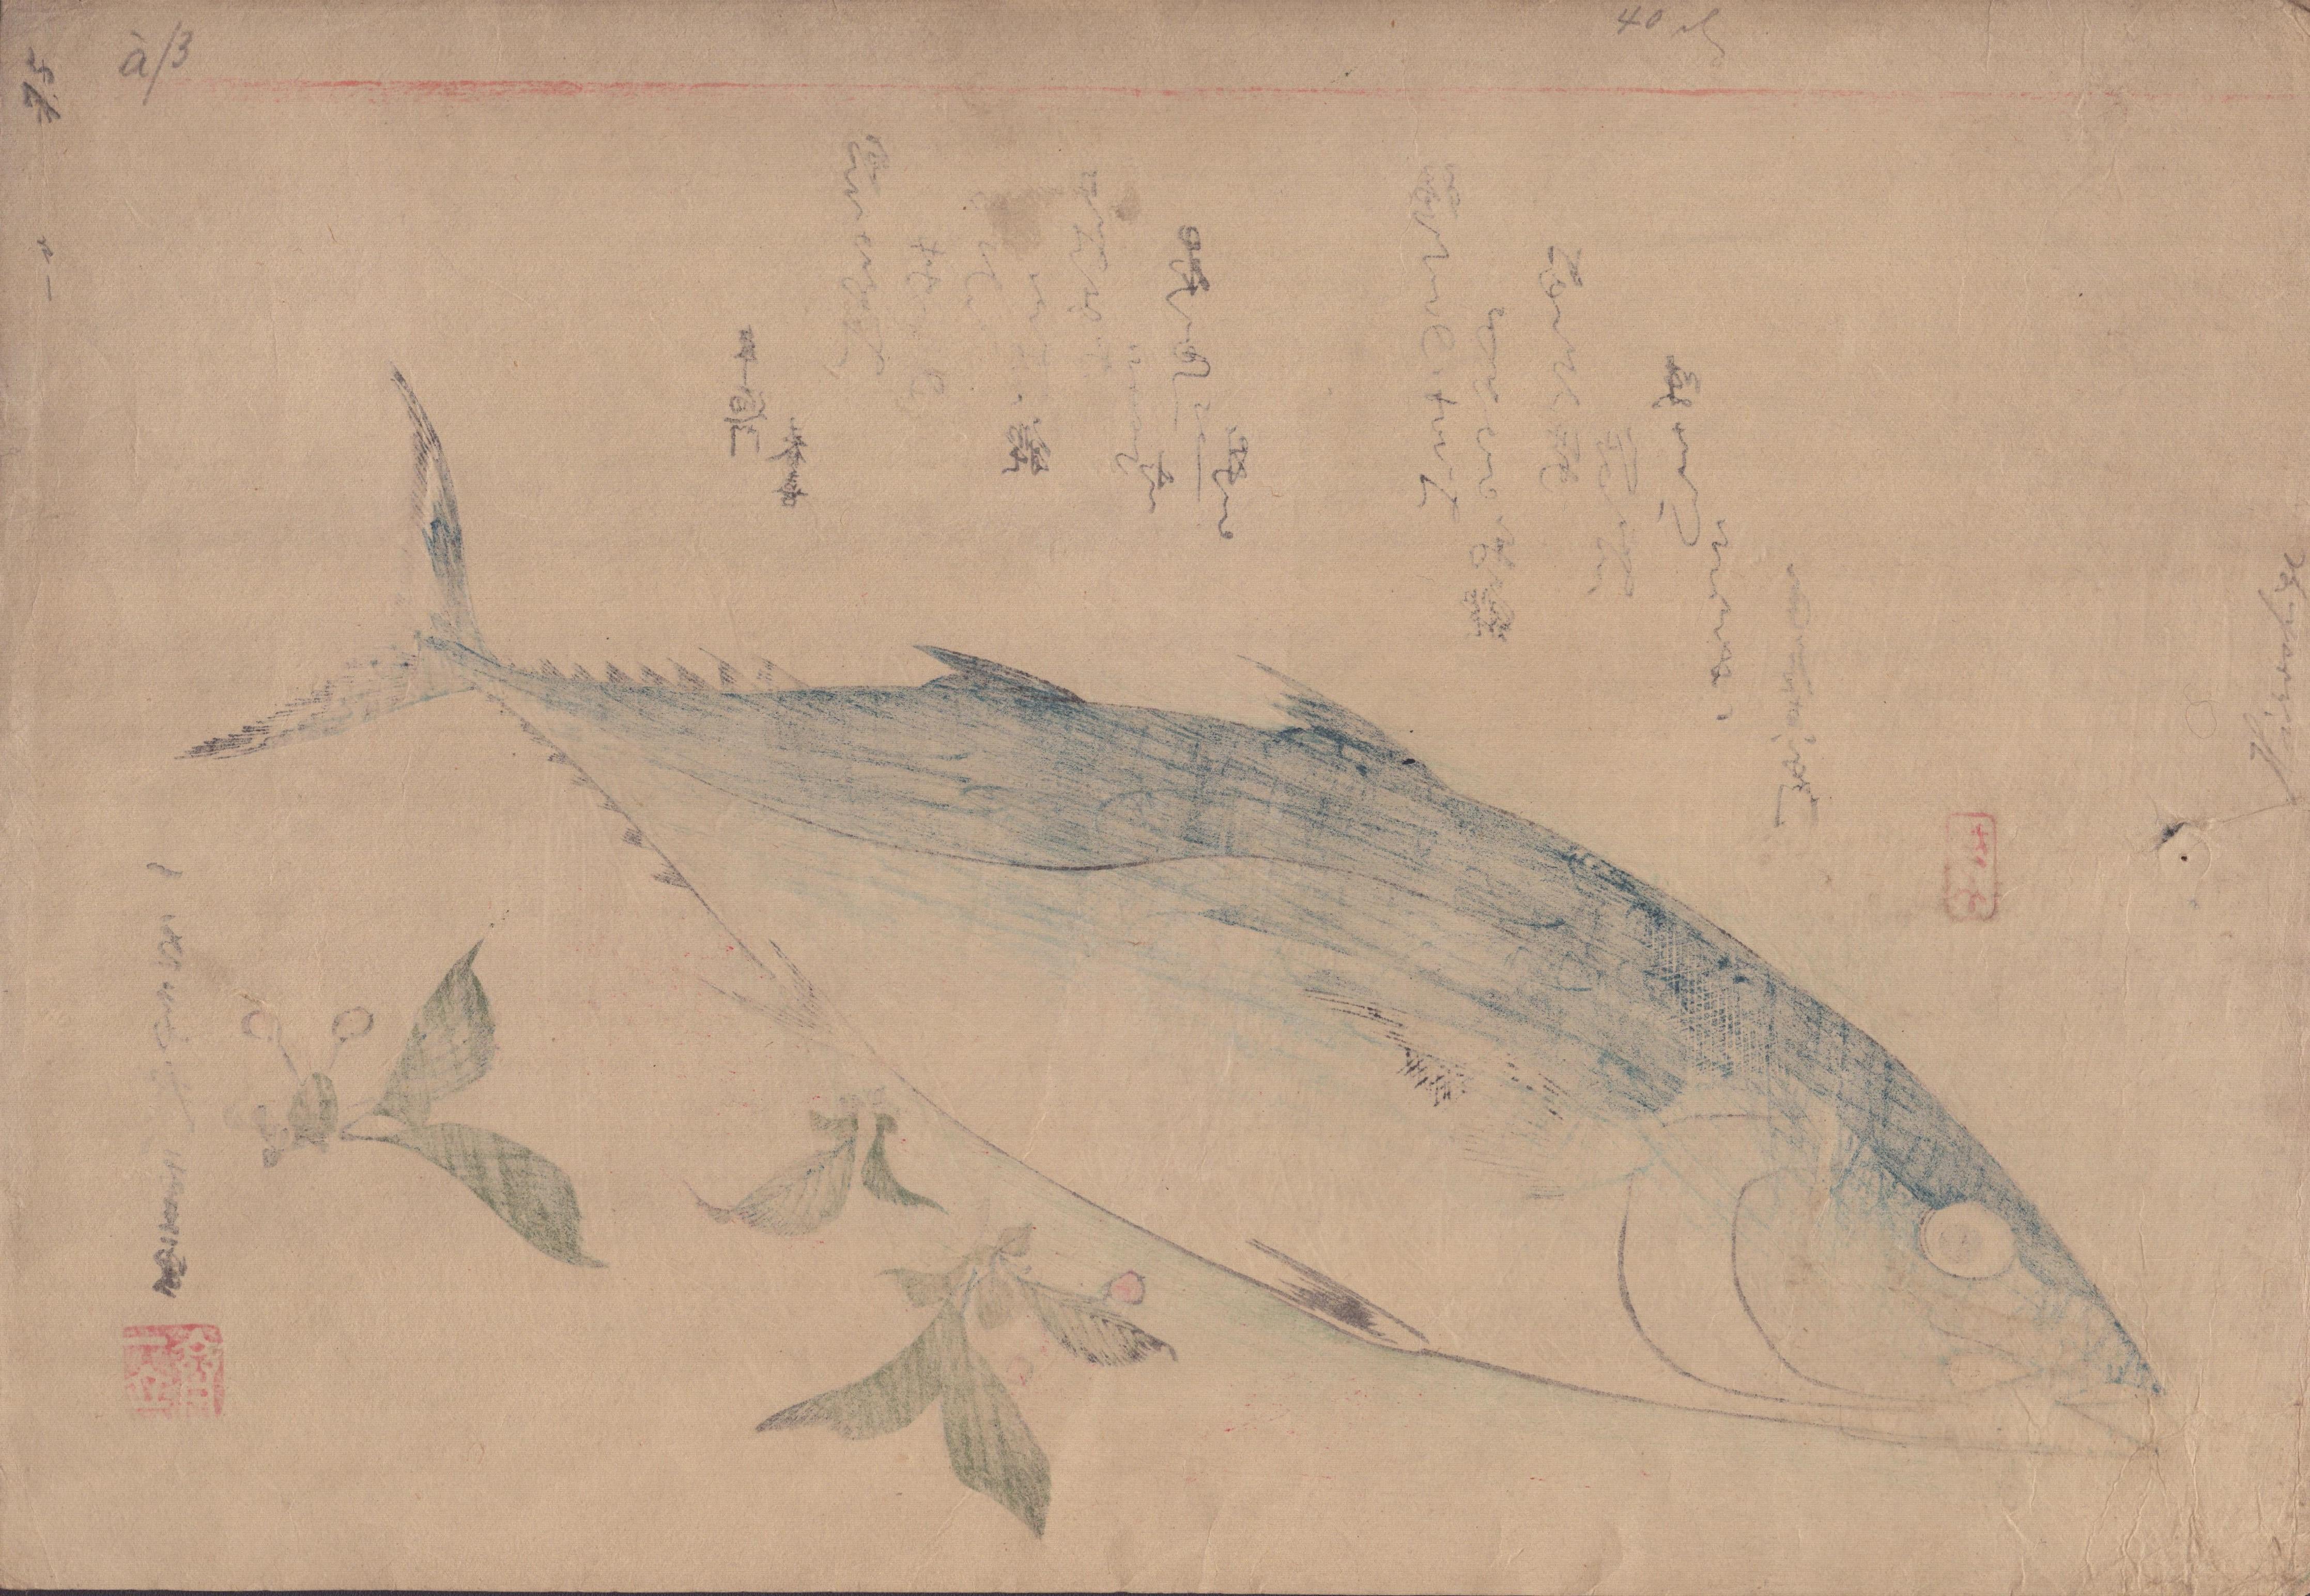 Utagawa Hiroshige (1797–1858) 

Bonito and Saxifrage (魚尽くし 鰹), from a series known as Large Fish 

Size: Oban, 38 * 26.3 cm

Edo period 

A pinhole on the left, otherwise excellent impression and colour 